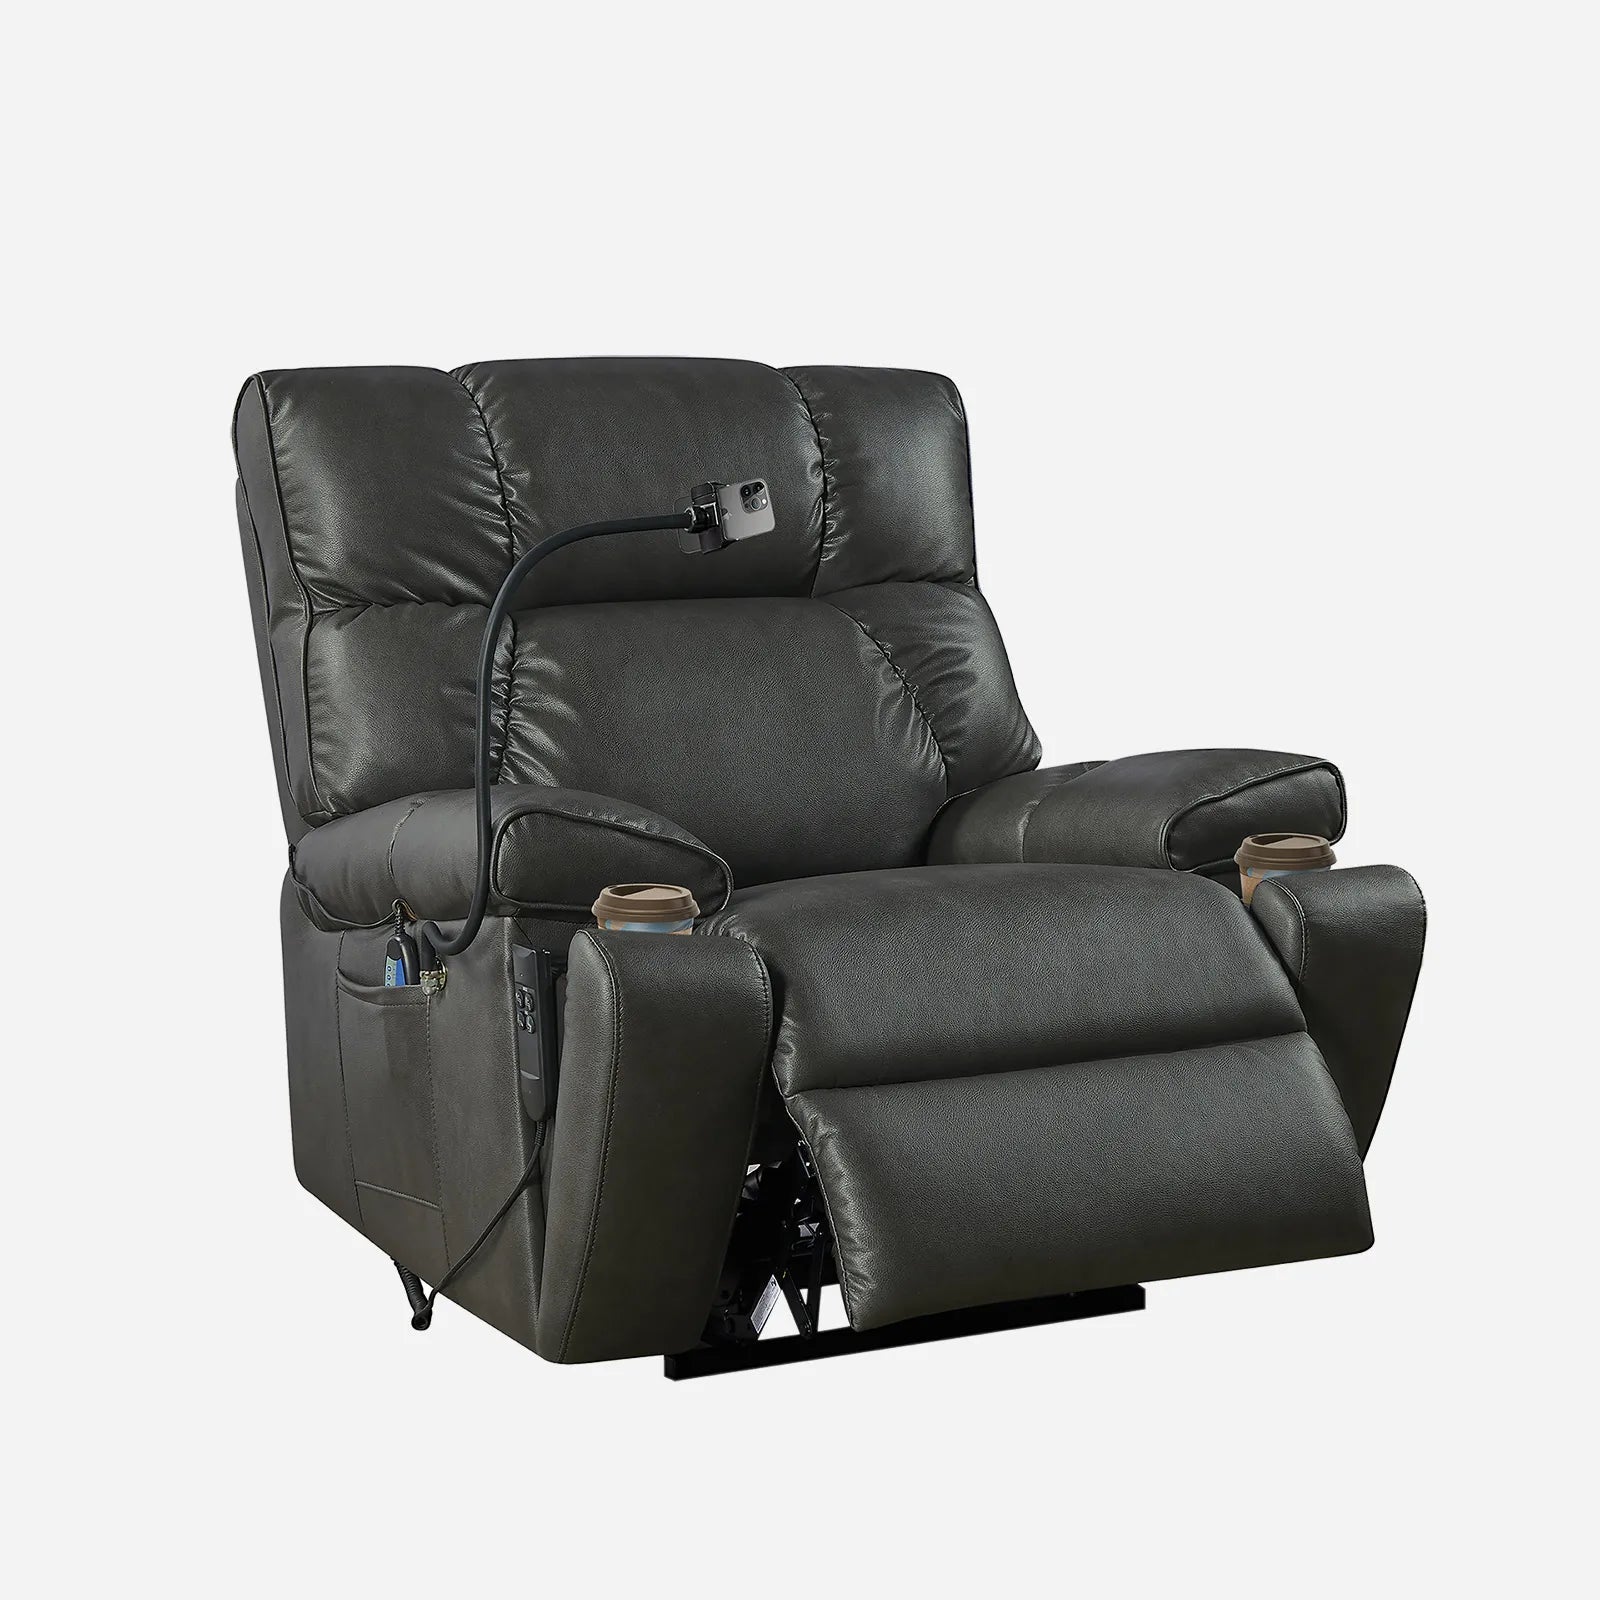 black leather lift recliner chair